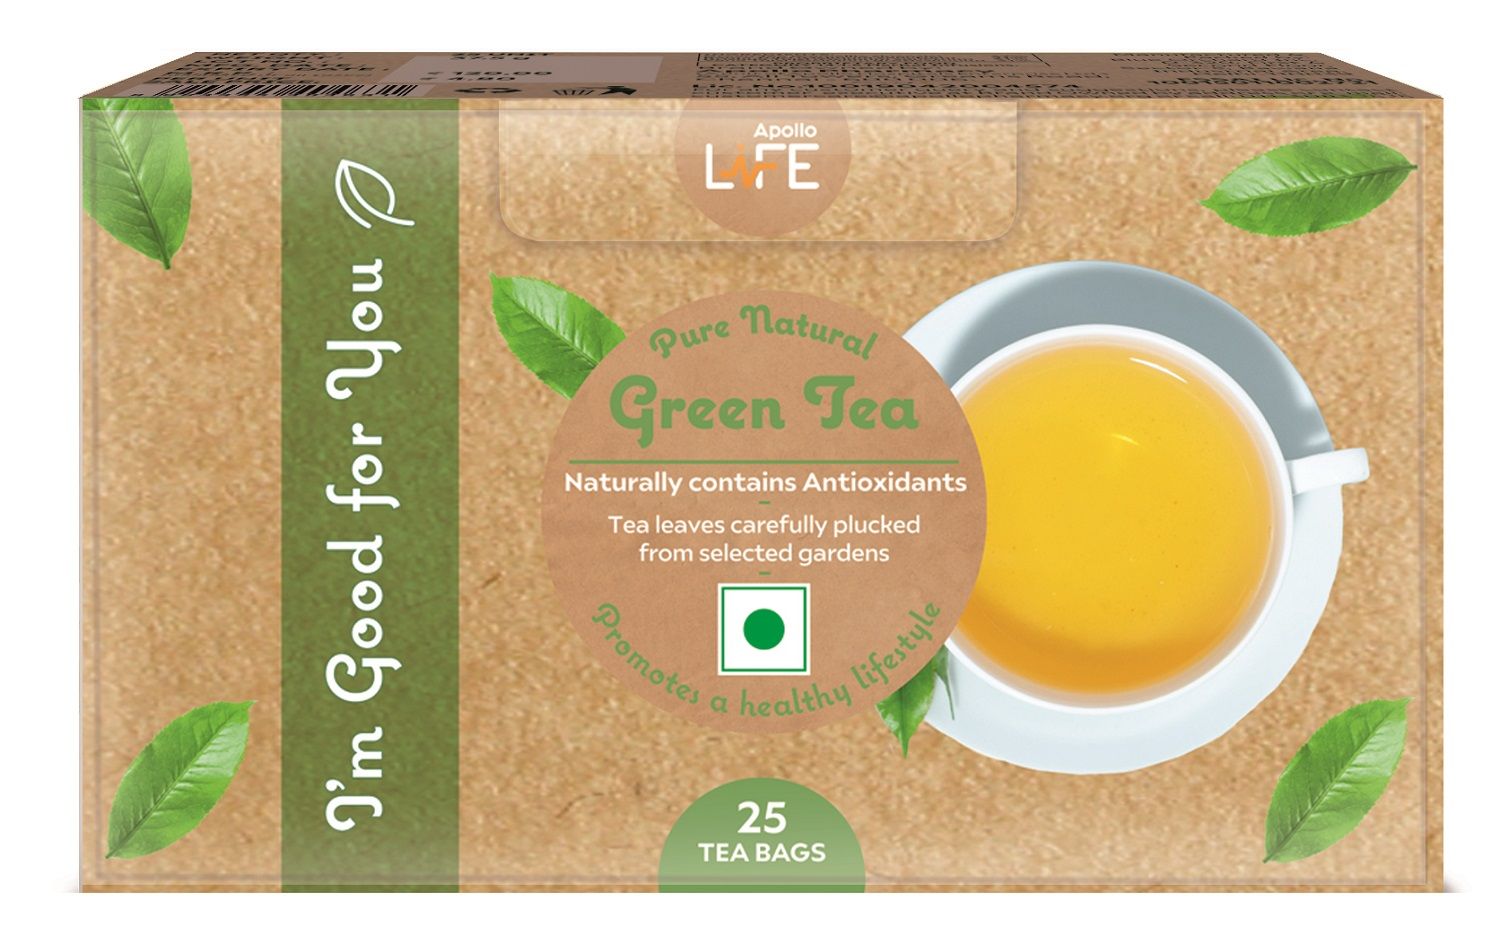 Buy Apollo Life Pure Natural Green Tea Bags, 25 Count Online